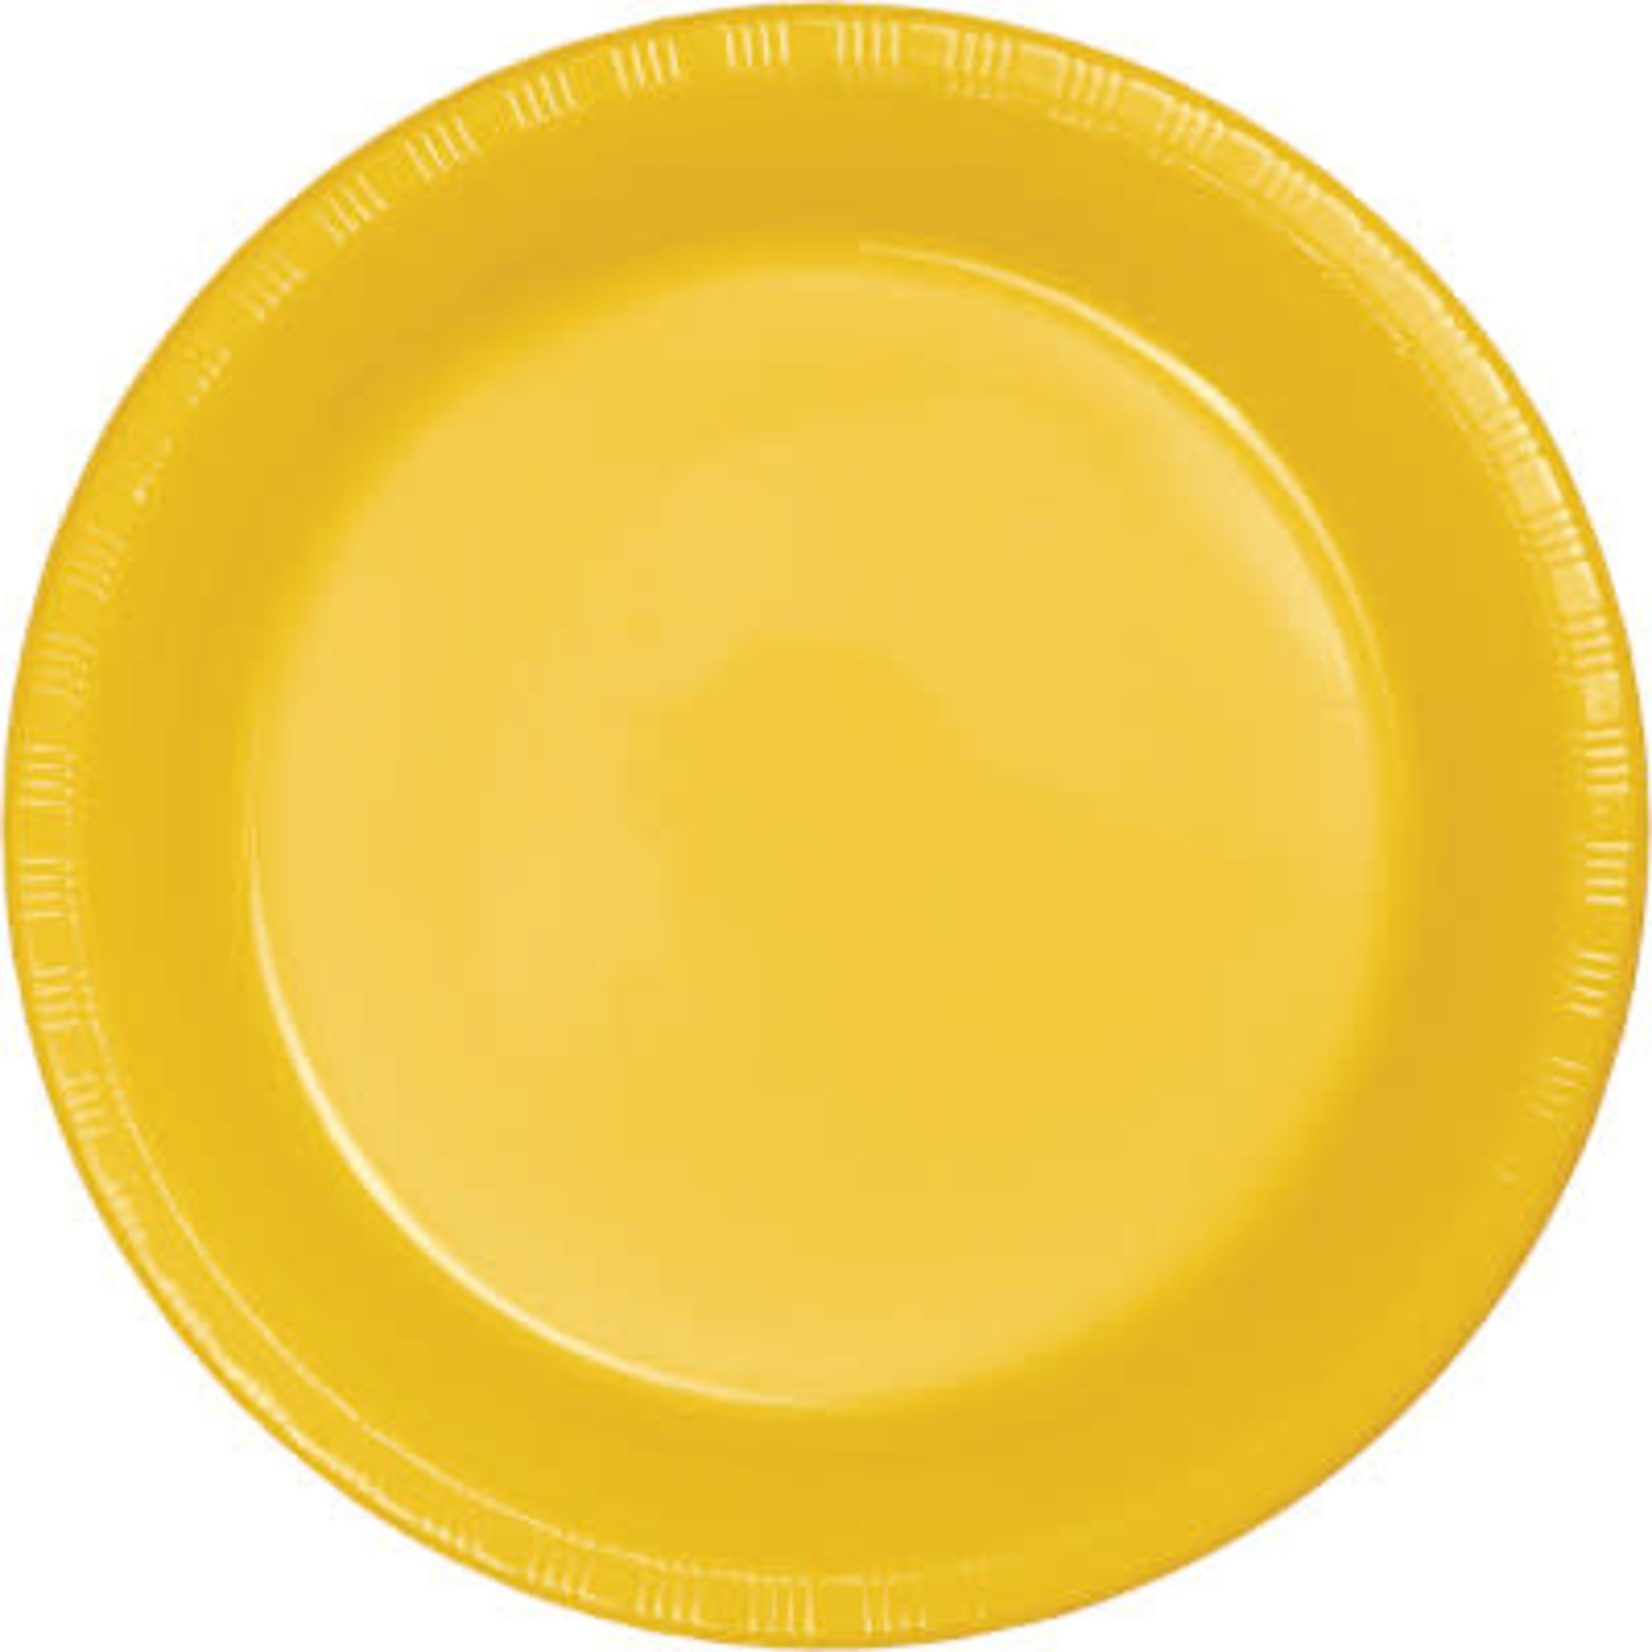 Touch of Color 7" School Bus Yellow Paper Plates - 24ct.